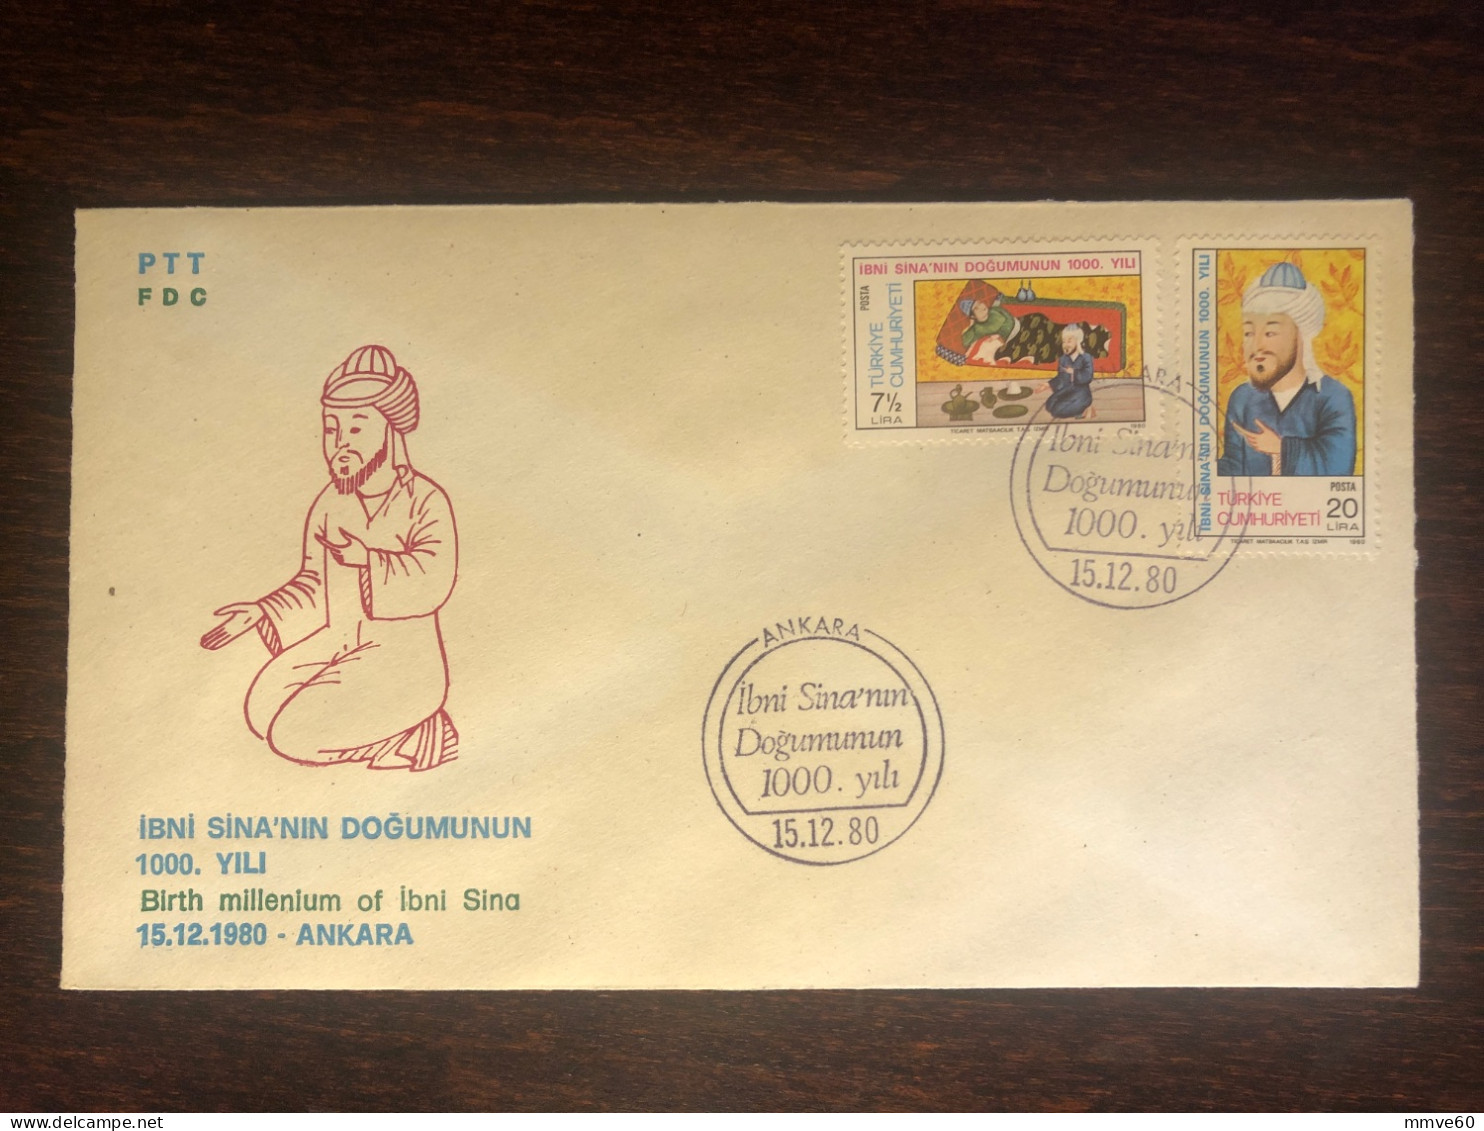 TURKEY FDC COVER 1980 YEAR AVICENNA IBN SINA HEALTH MEDICINE STAMPS - FDC